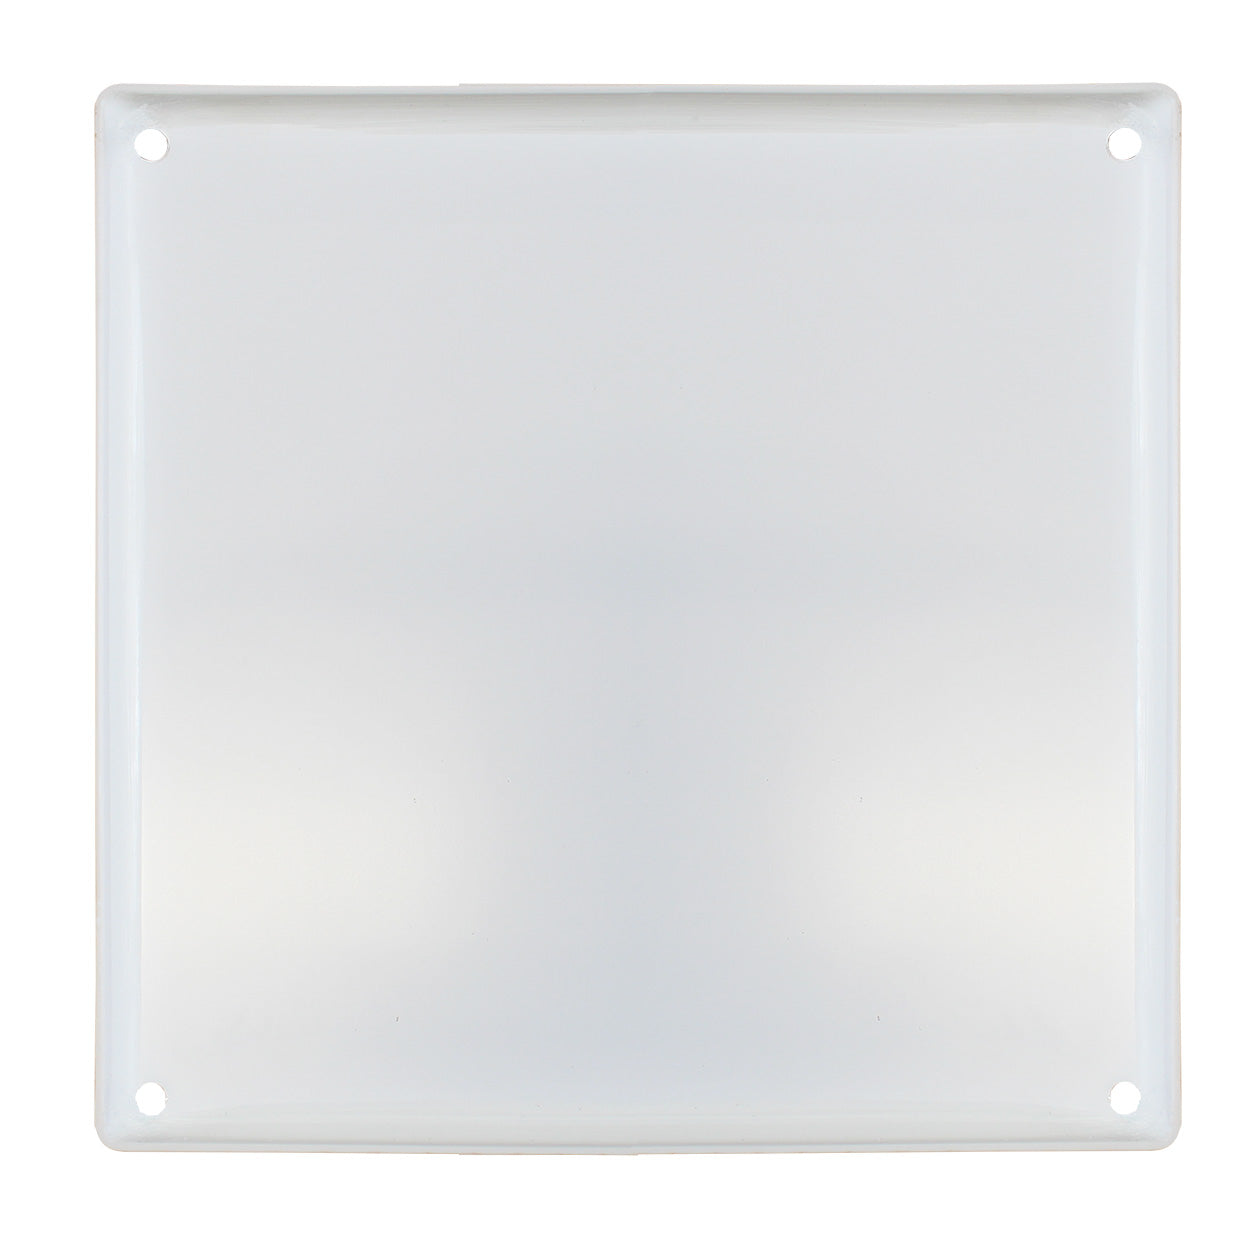 HEKA Contact Warm Plate for Chicks, 40cm x 40cm - optional with Dimmer